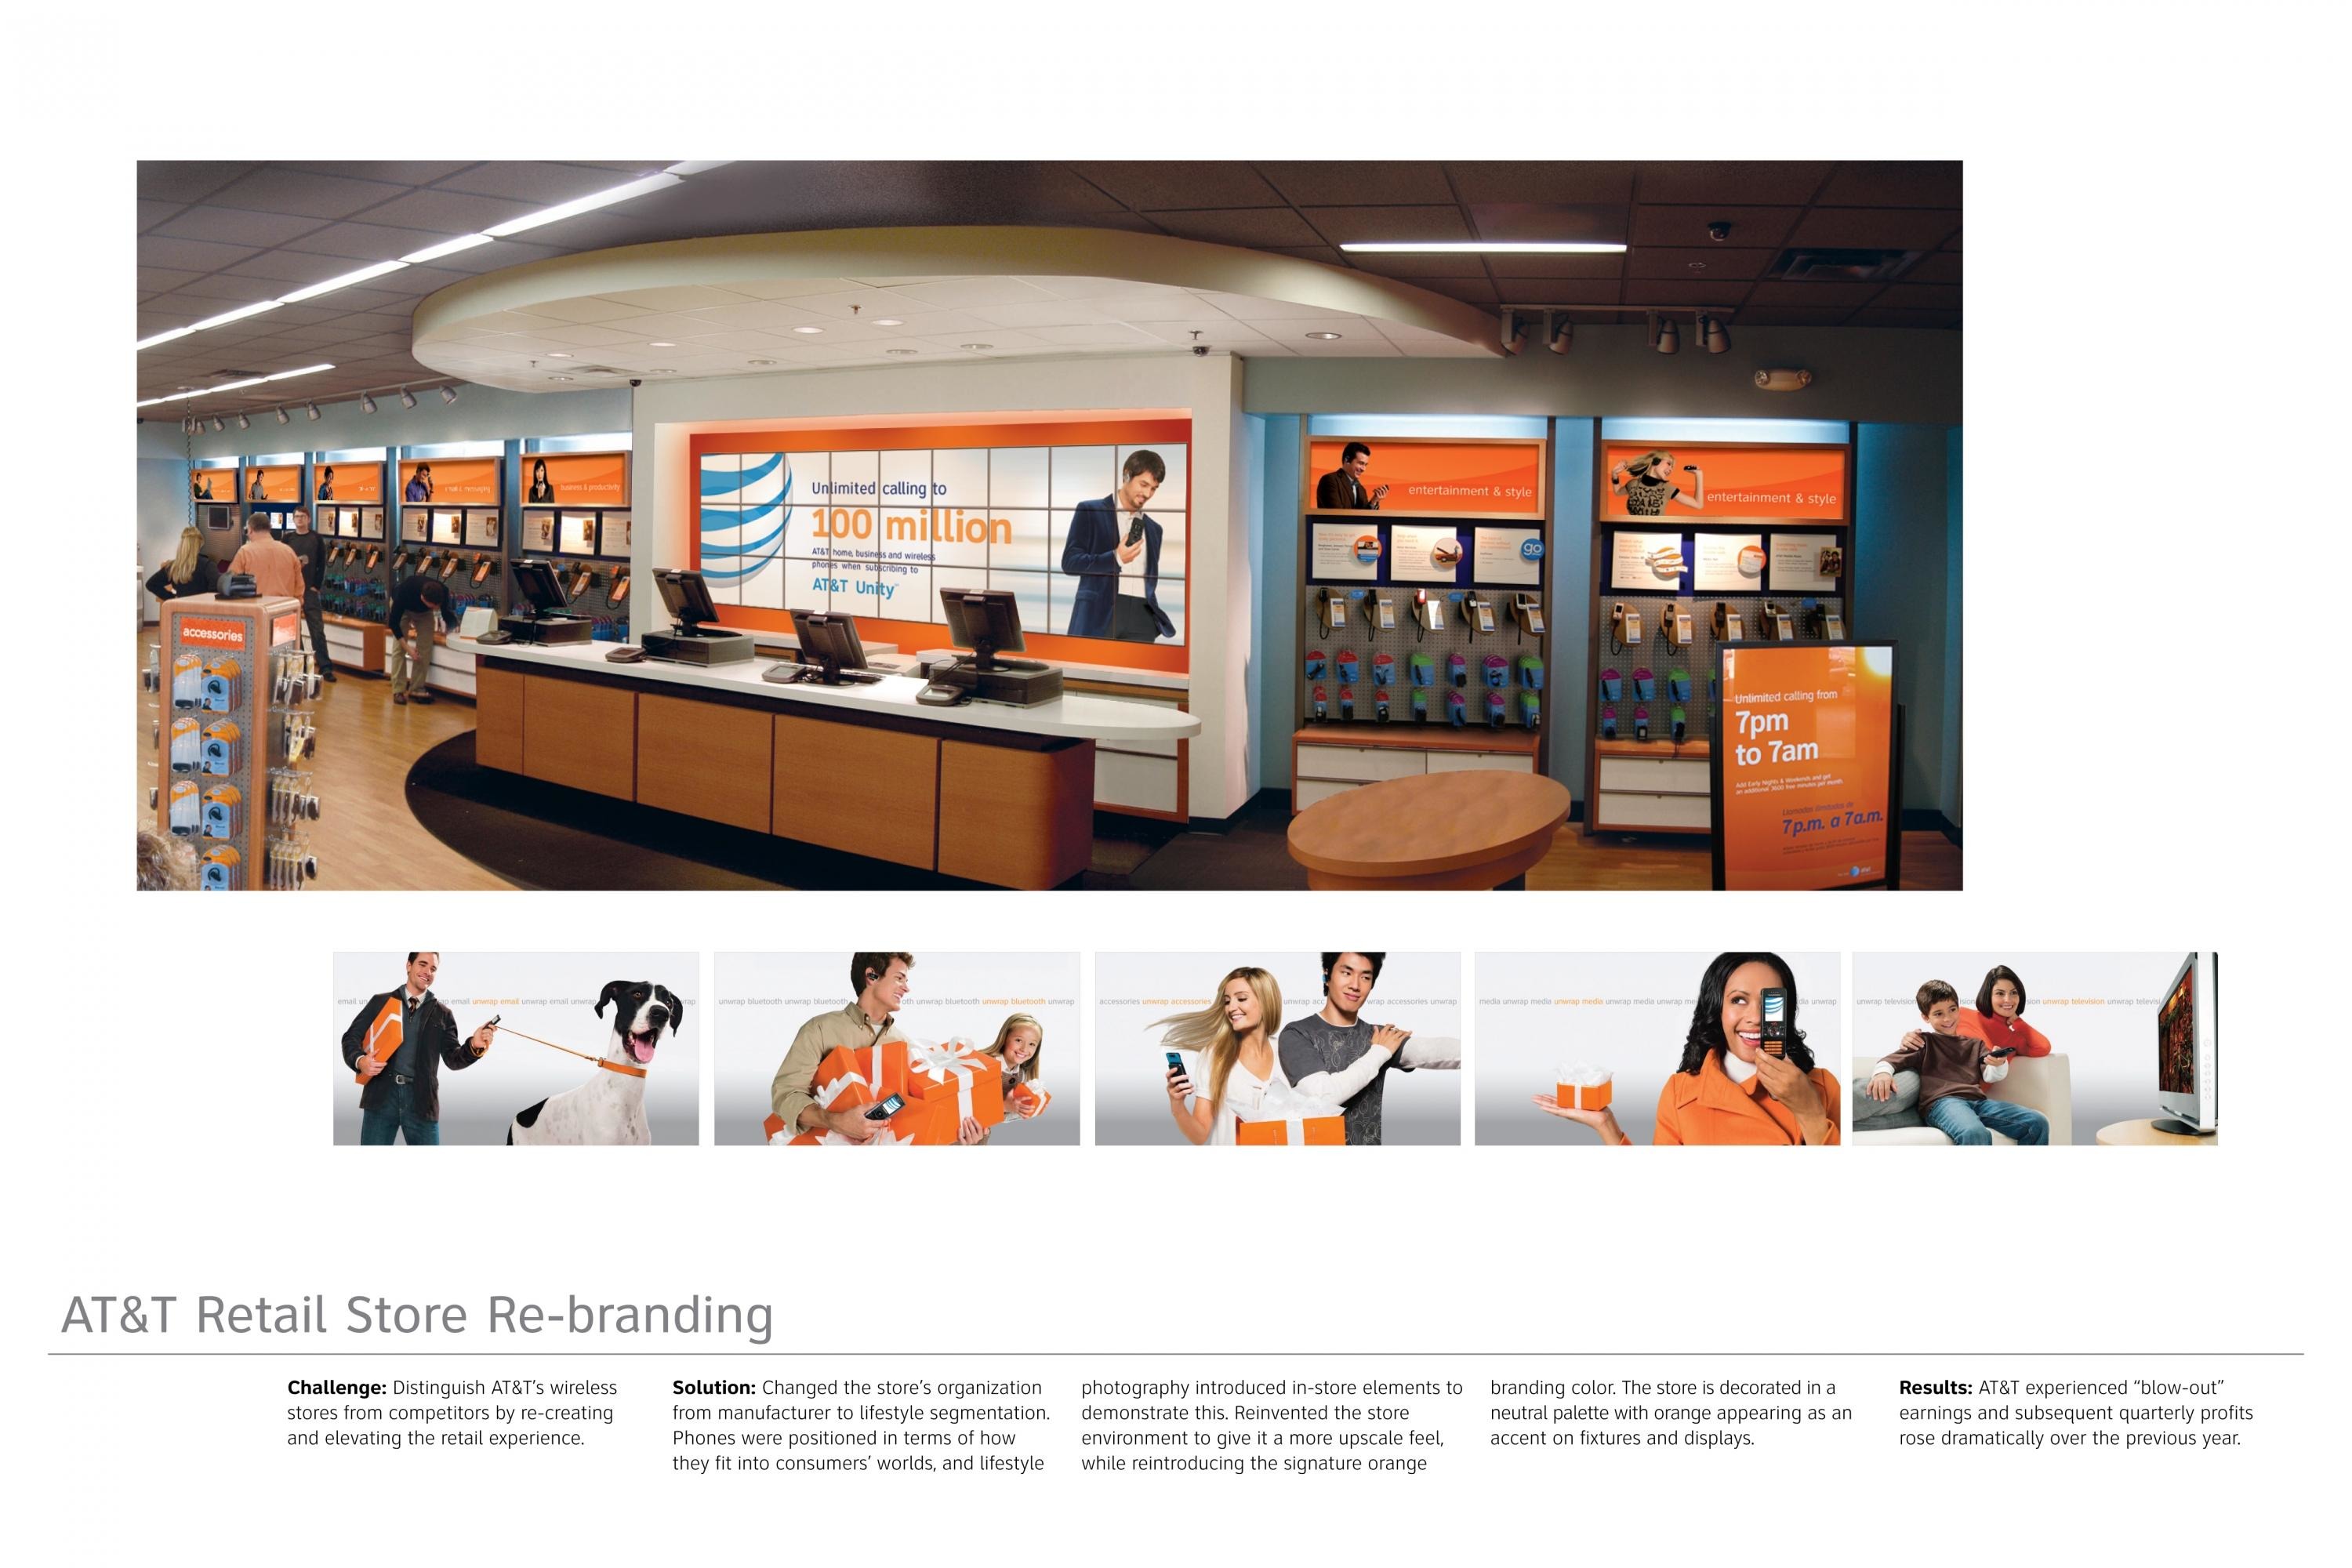 AT&T RETAIL STORE RE-BRANDING